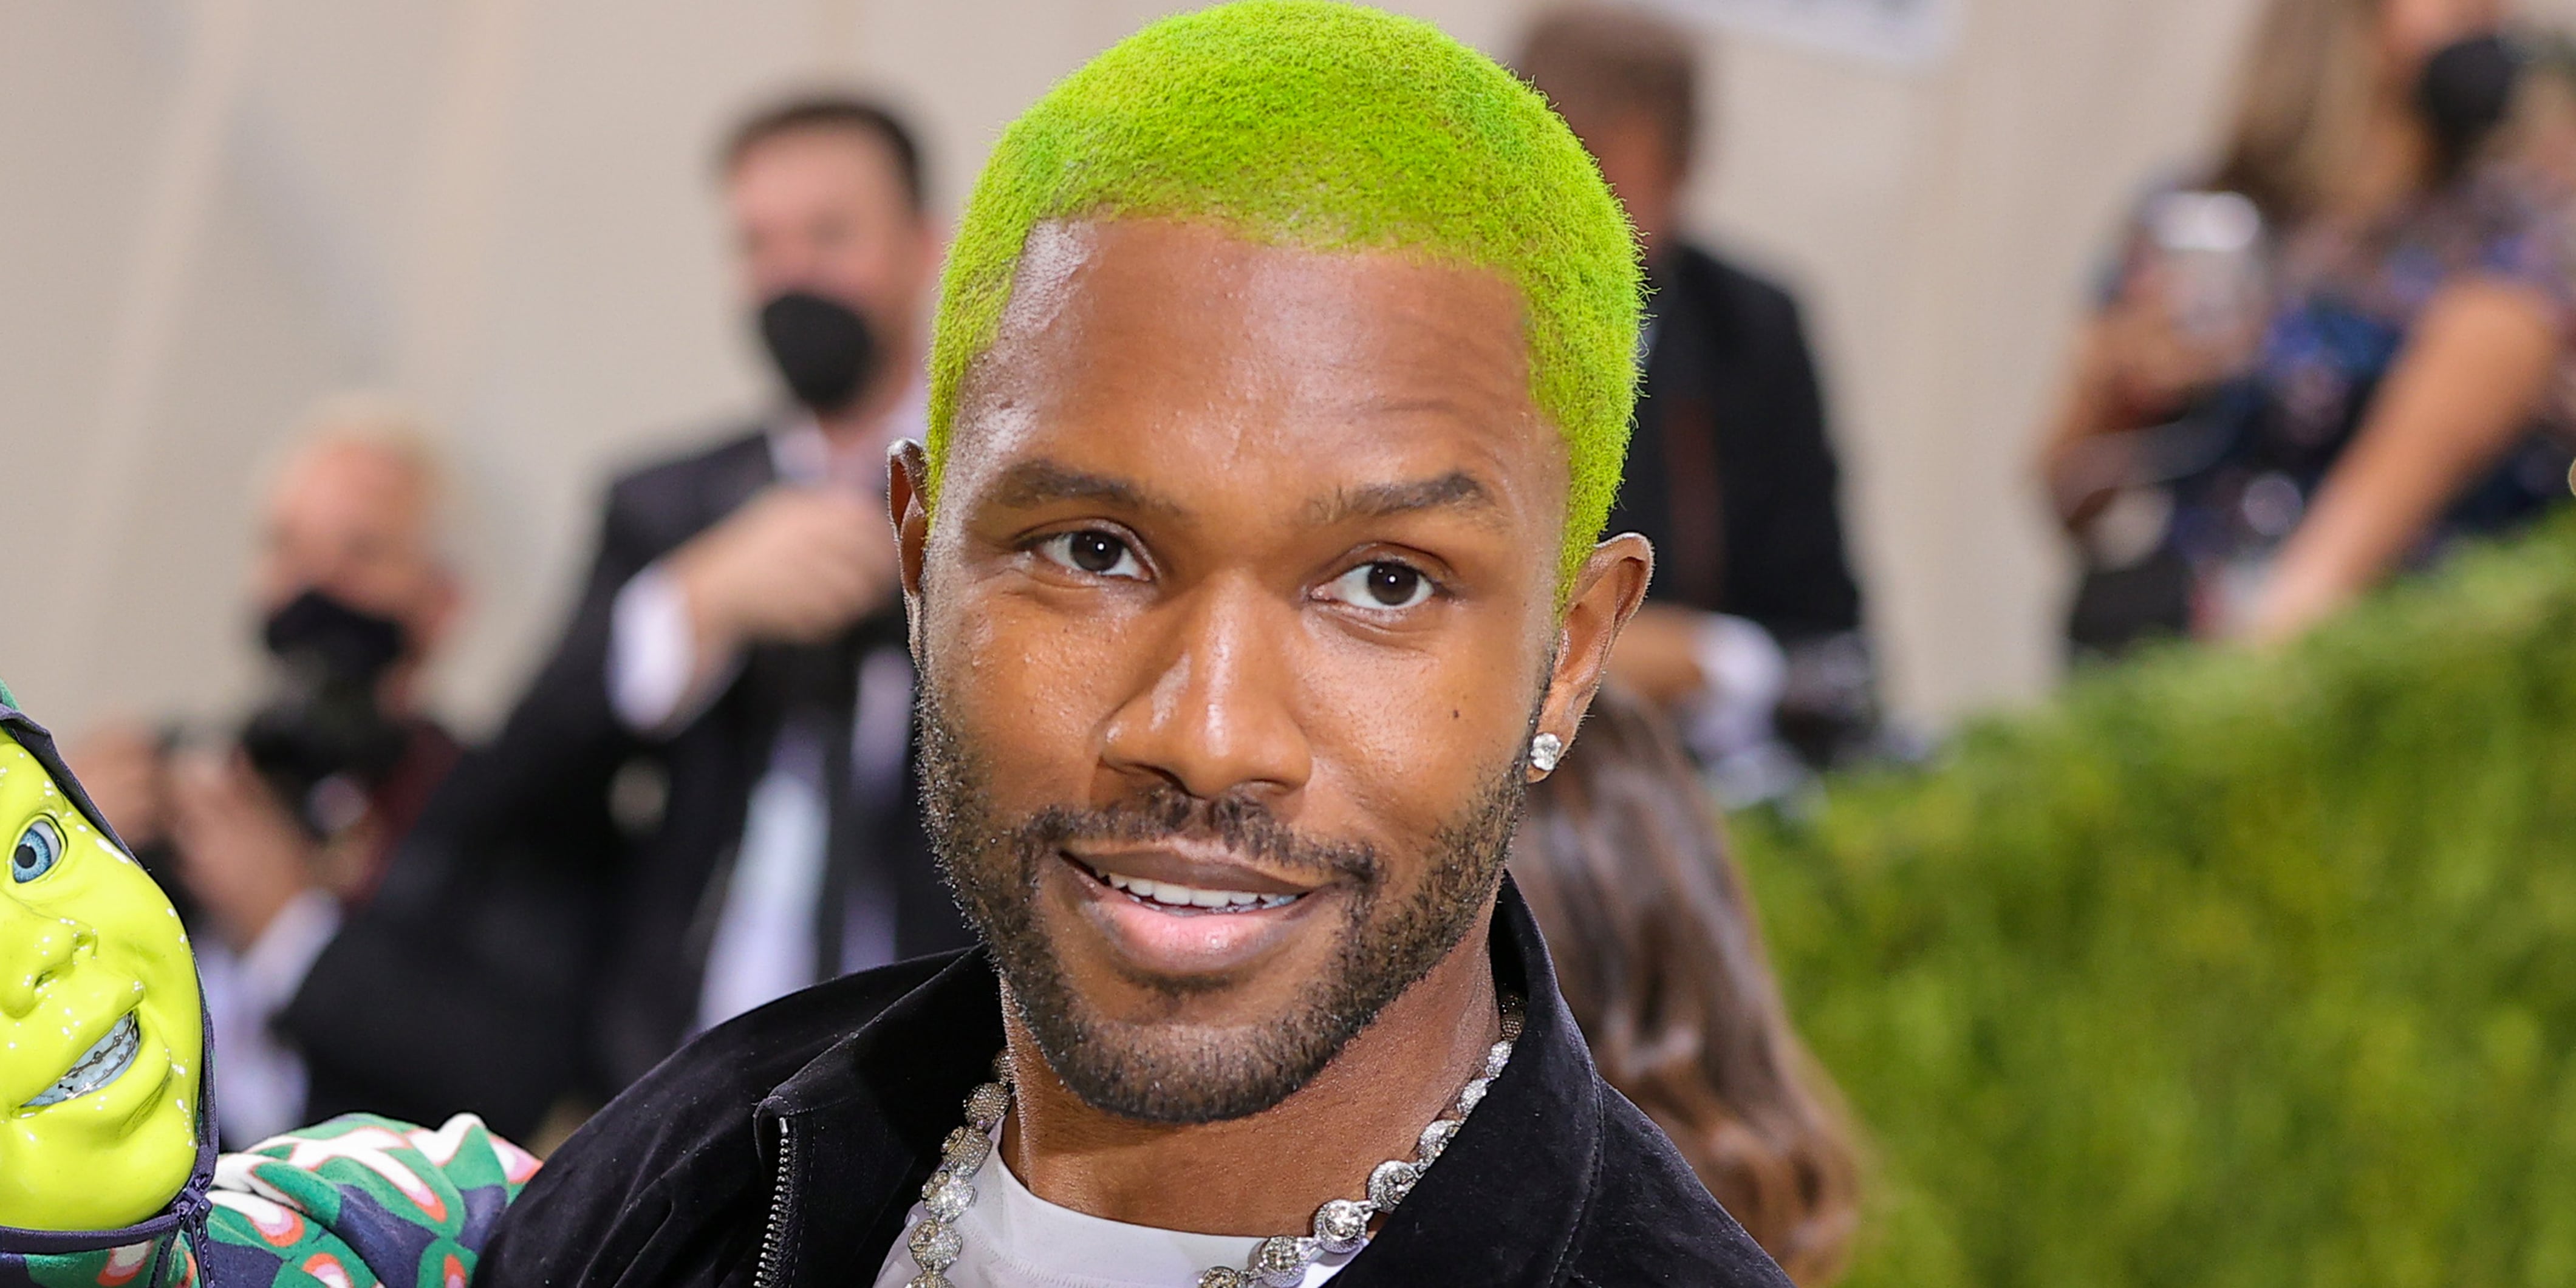 Frank Ocean records another first as Channel Orange is named album